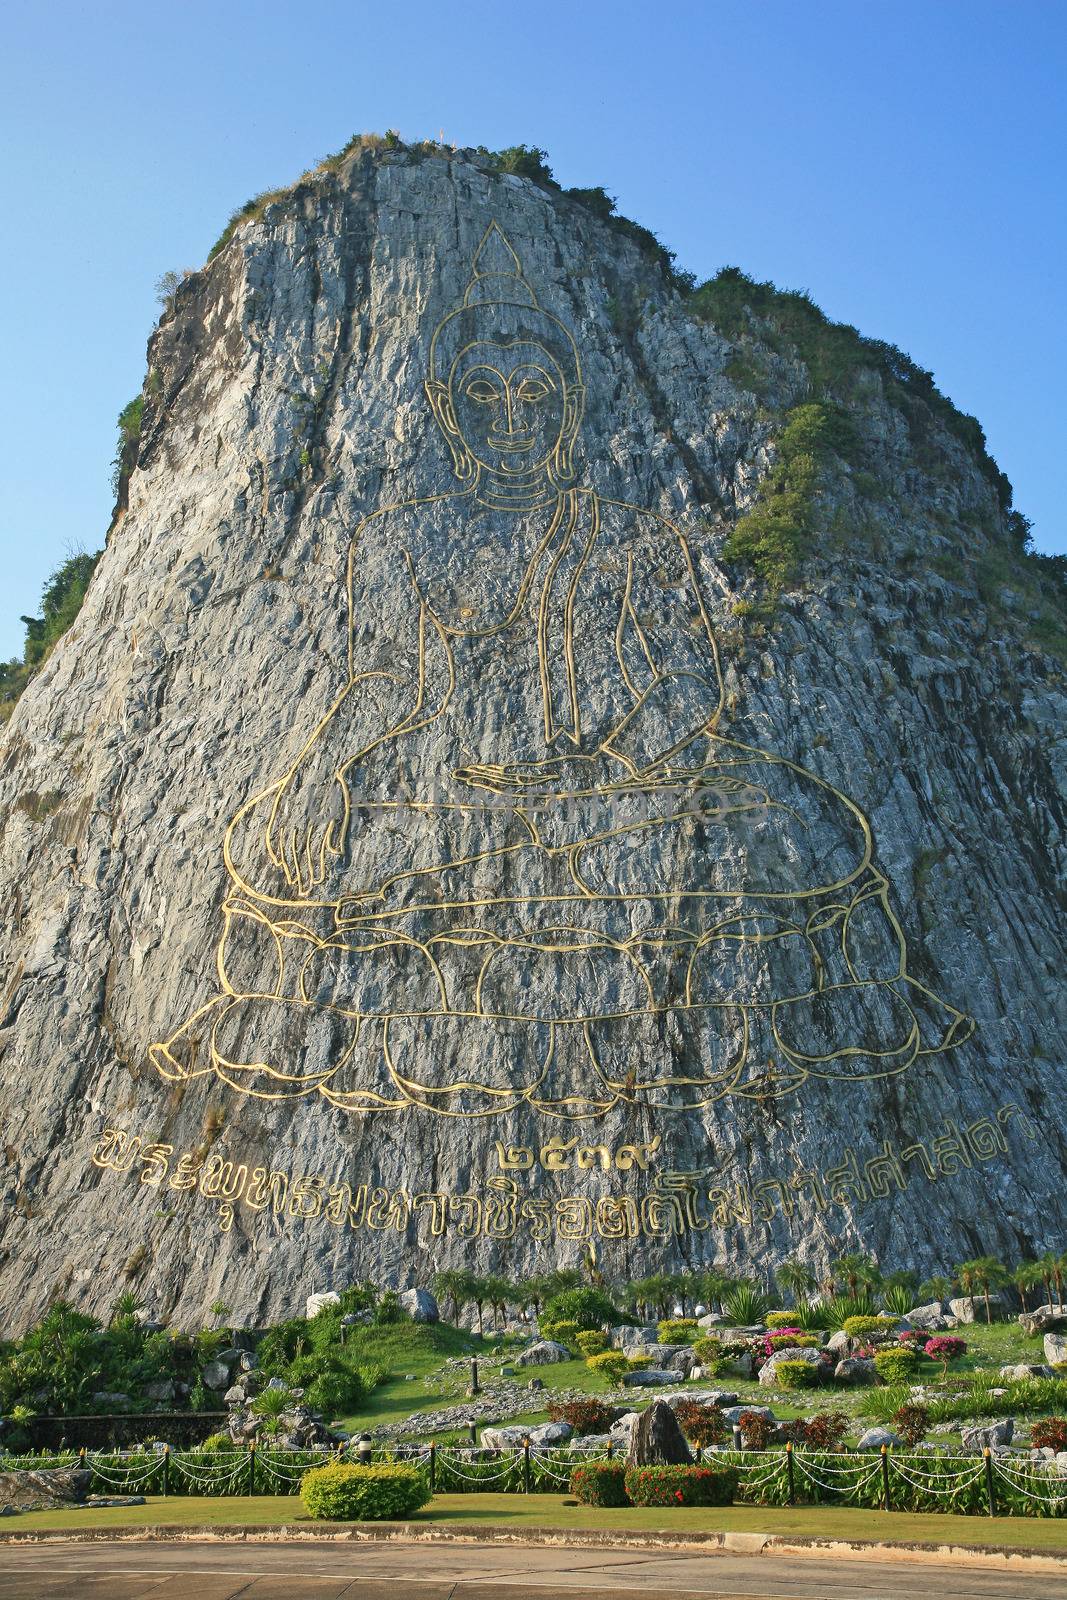 Carved buddha image on the cliff at Khao Chee Jan, Pattaya, Thailand